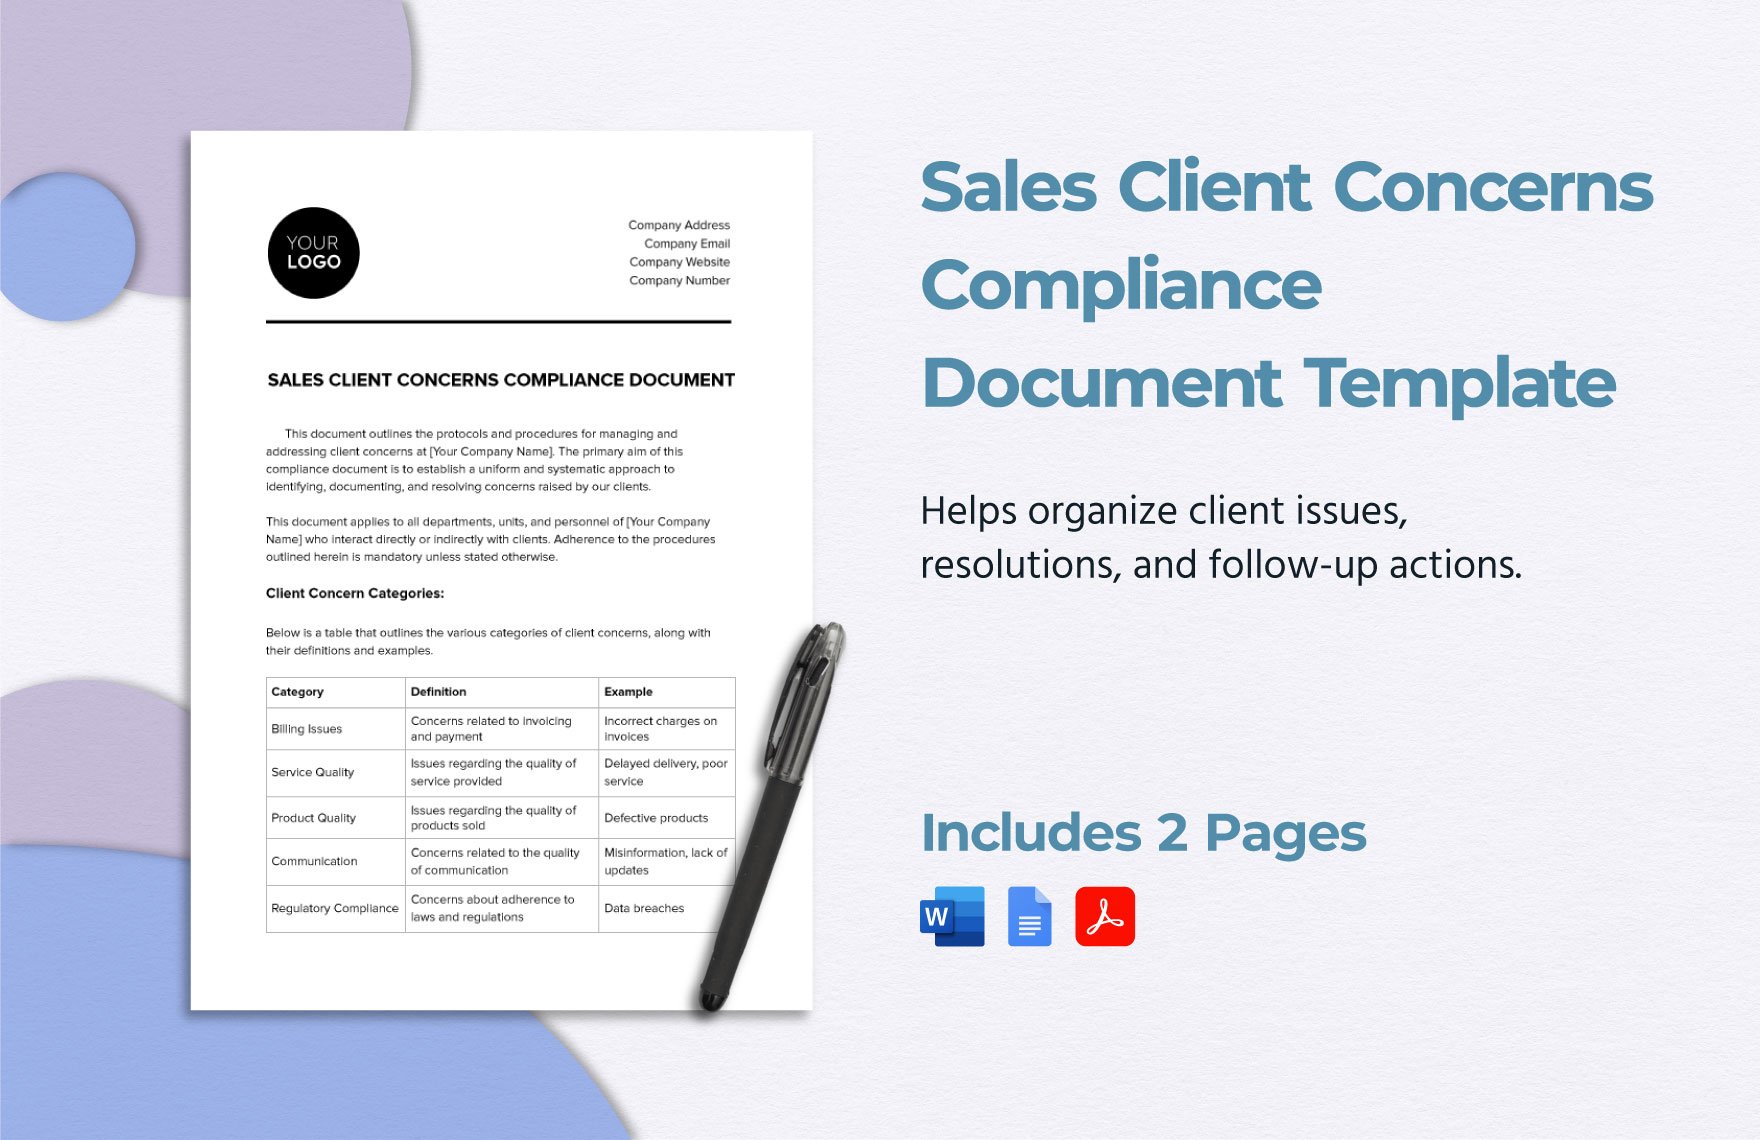 Sales Client Concerns Compliance Document Template in Word, Google Docs, PDF